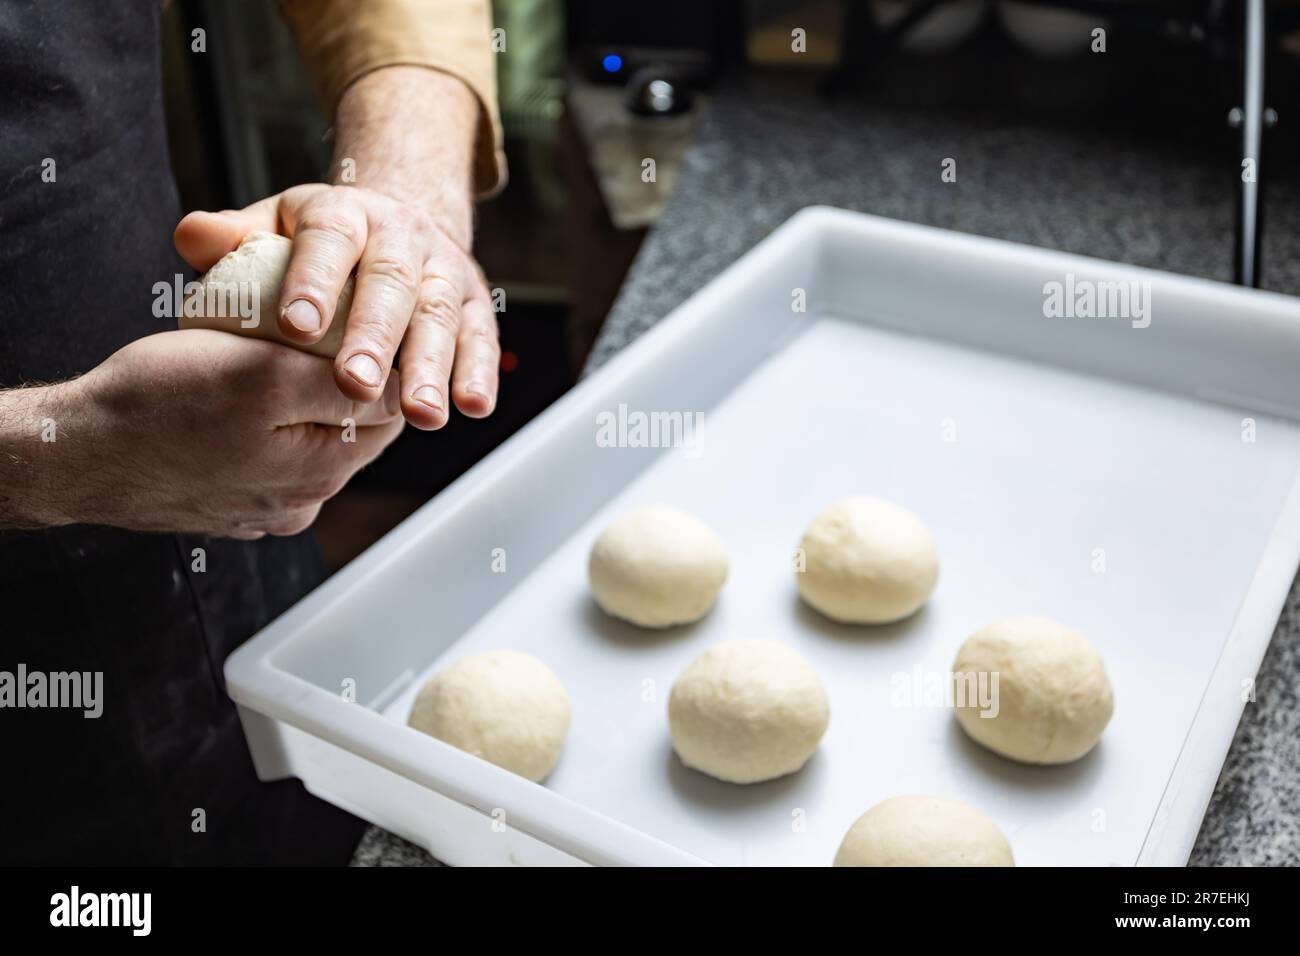 A baker delicately handling dough balls that will be used to bake a pastry Stock Photo